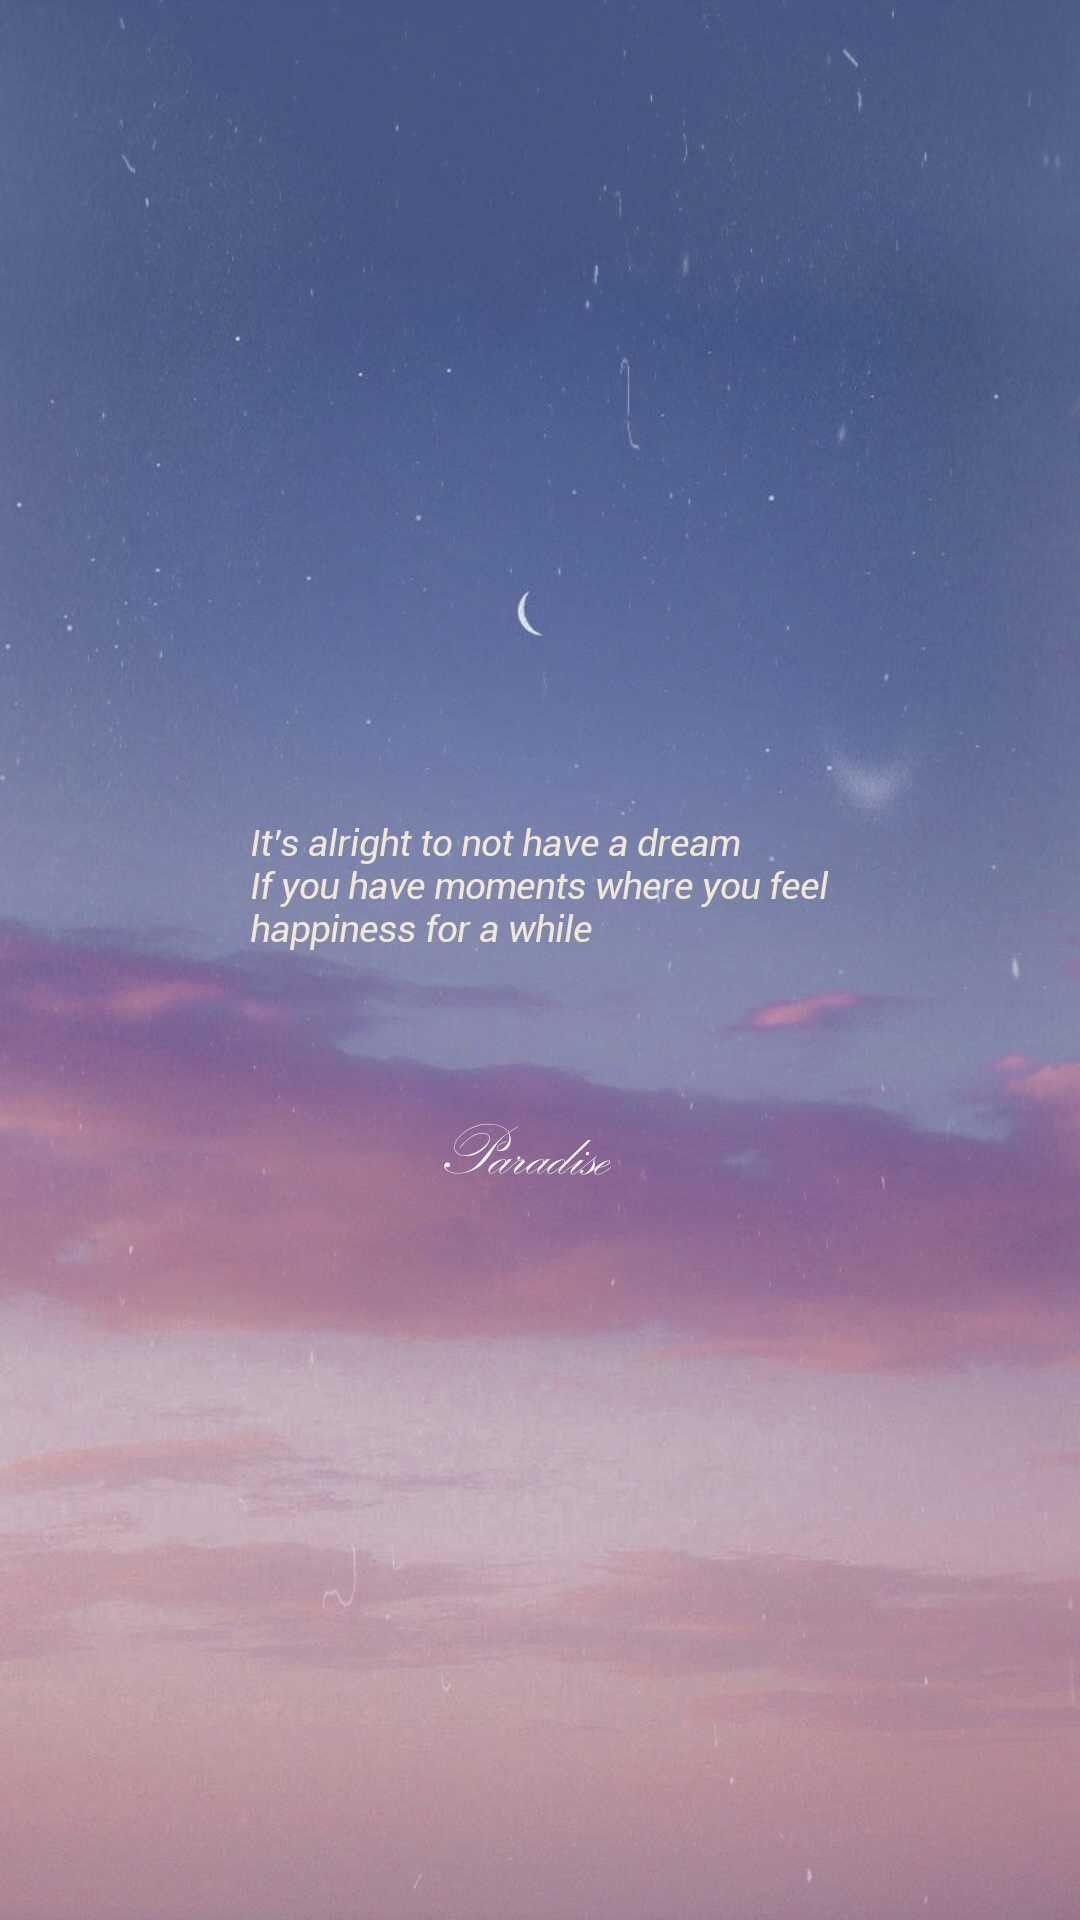 Aesthetic Quotes Sad Wallpapers - Wallpaper Cave